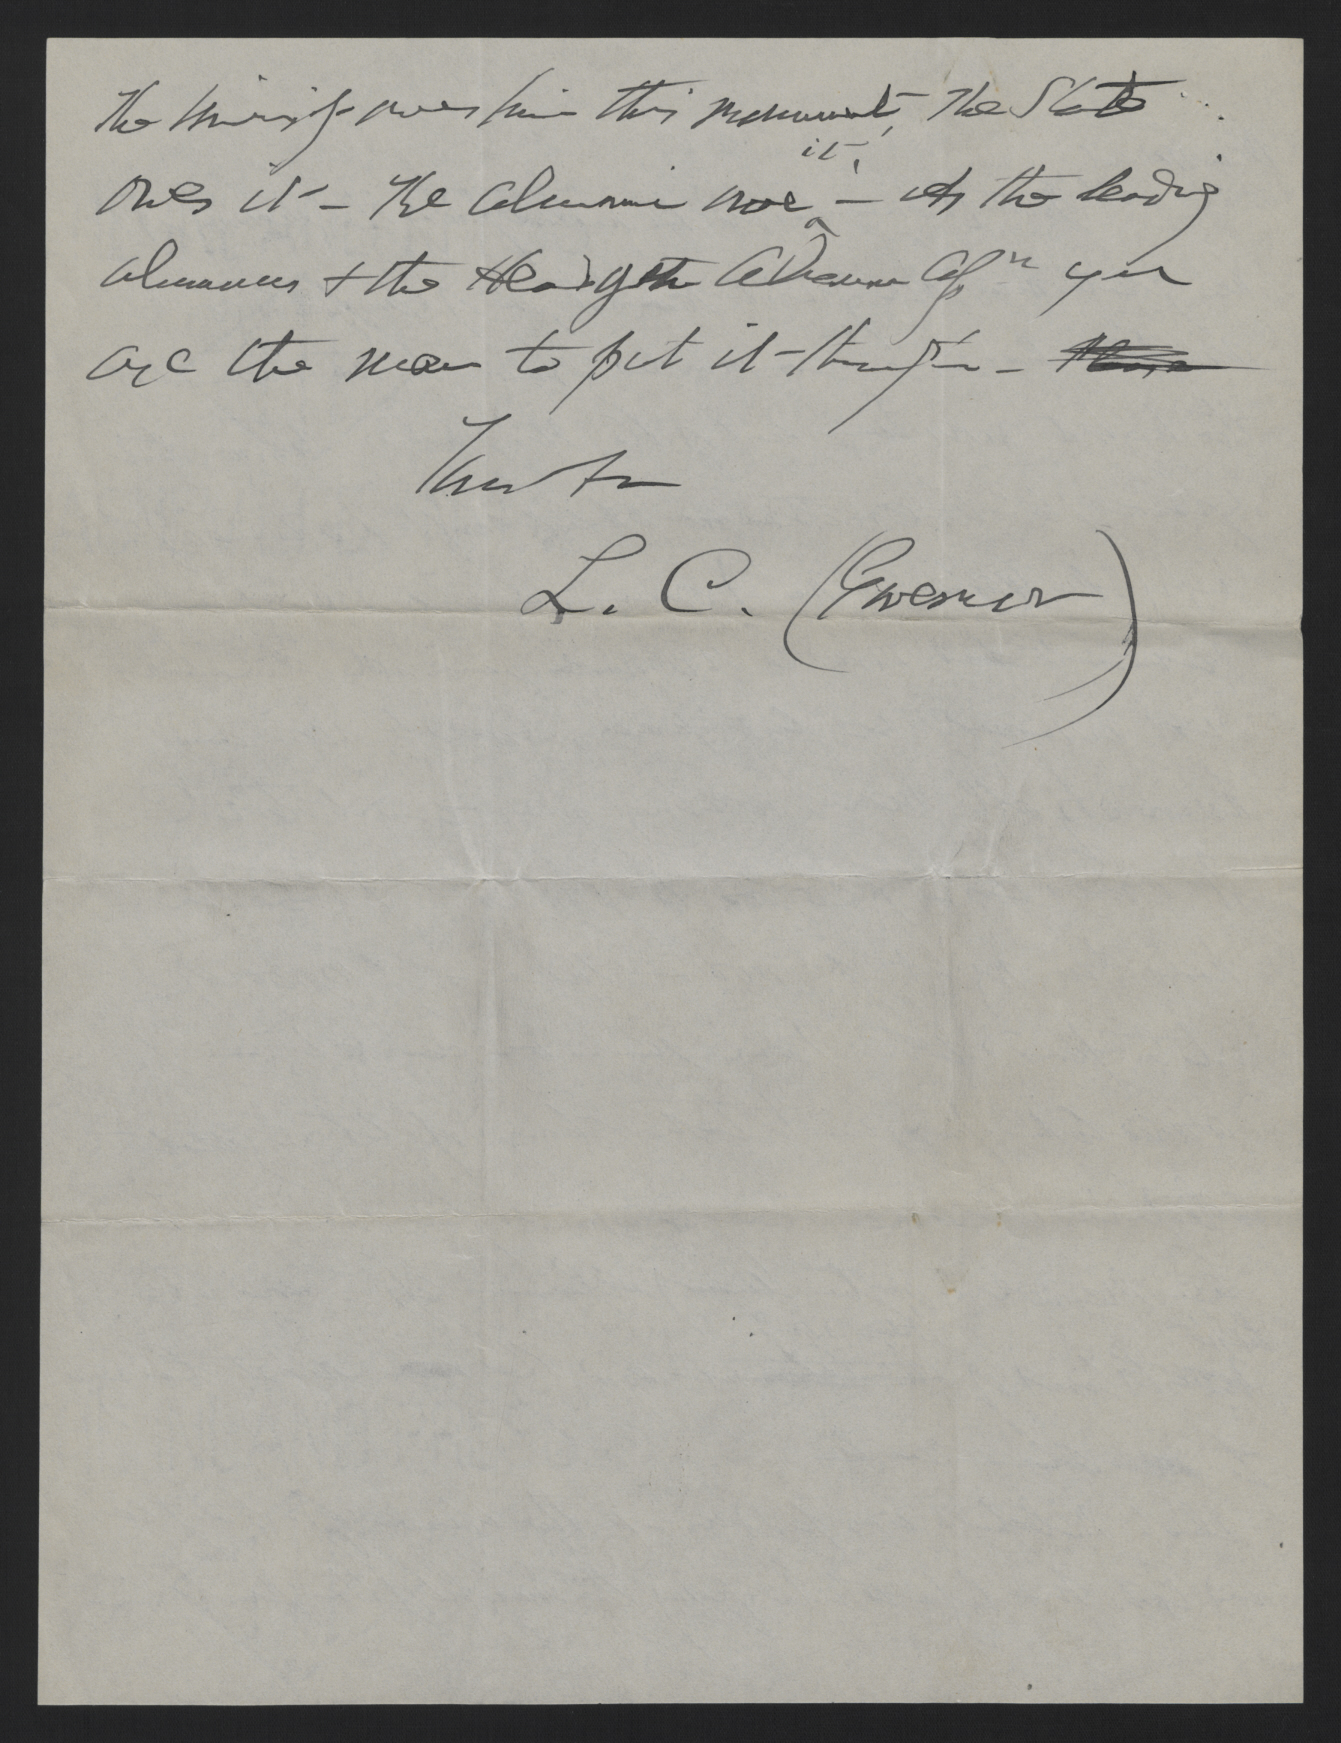 Draft of Letter from Locke Craig to Julian S. Carr written by George T. Winston, circa March 1916, page 2